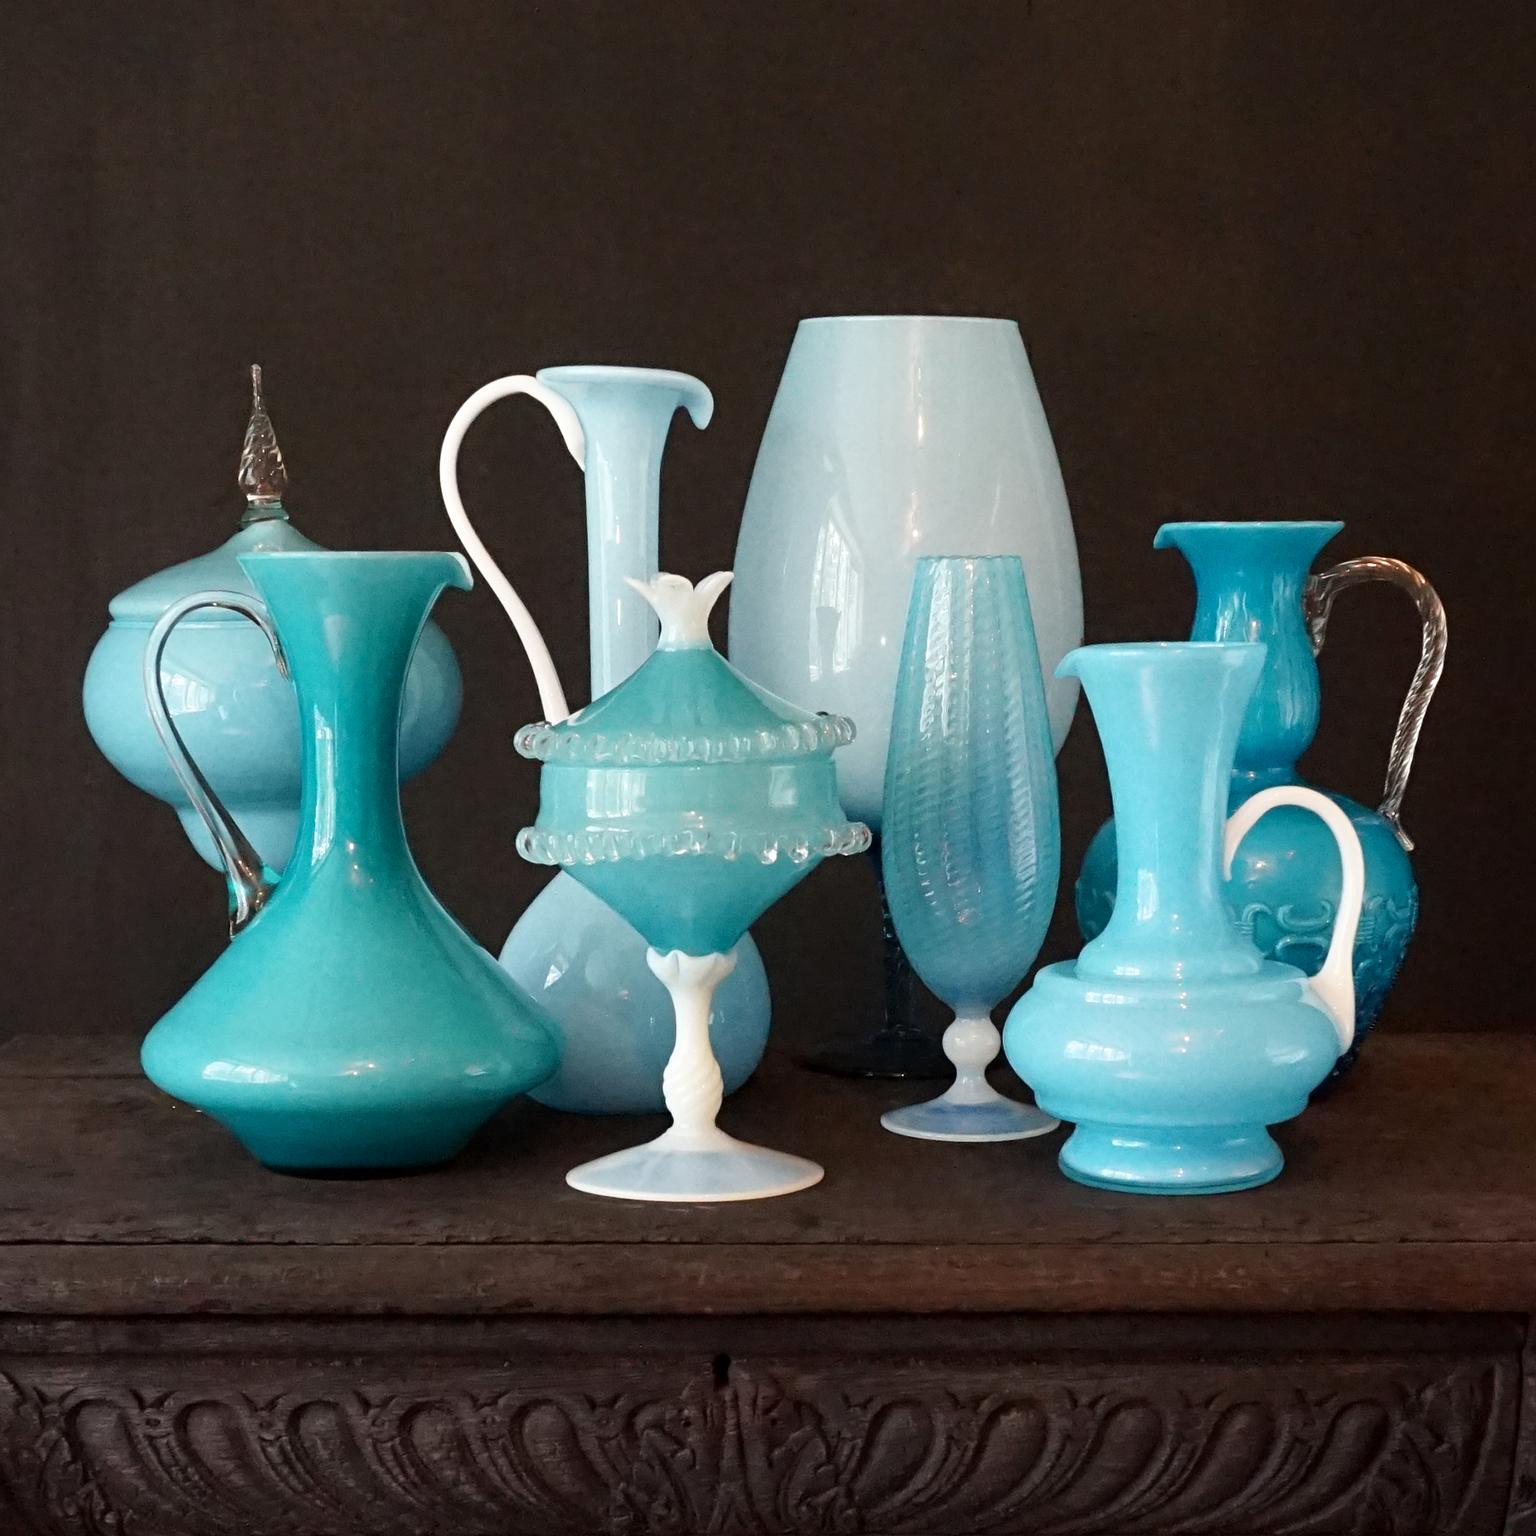 Very pretty set of eight 1960s Italian Empoli Rossini and Stelvio Opalina Fiorentina cased glass vases, decanters and candy or apothecary jars. In bright sky blue tone colours. A pretty mixture of different shades of ice-baby-sky blue in different